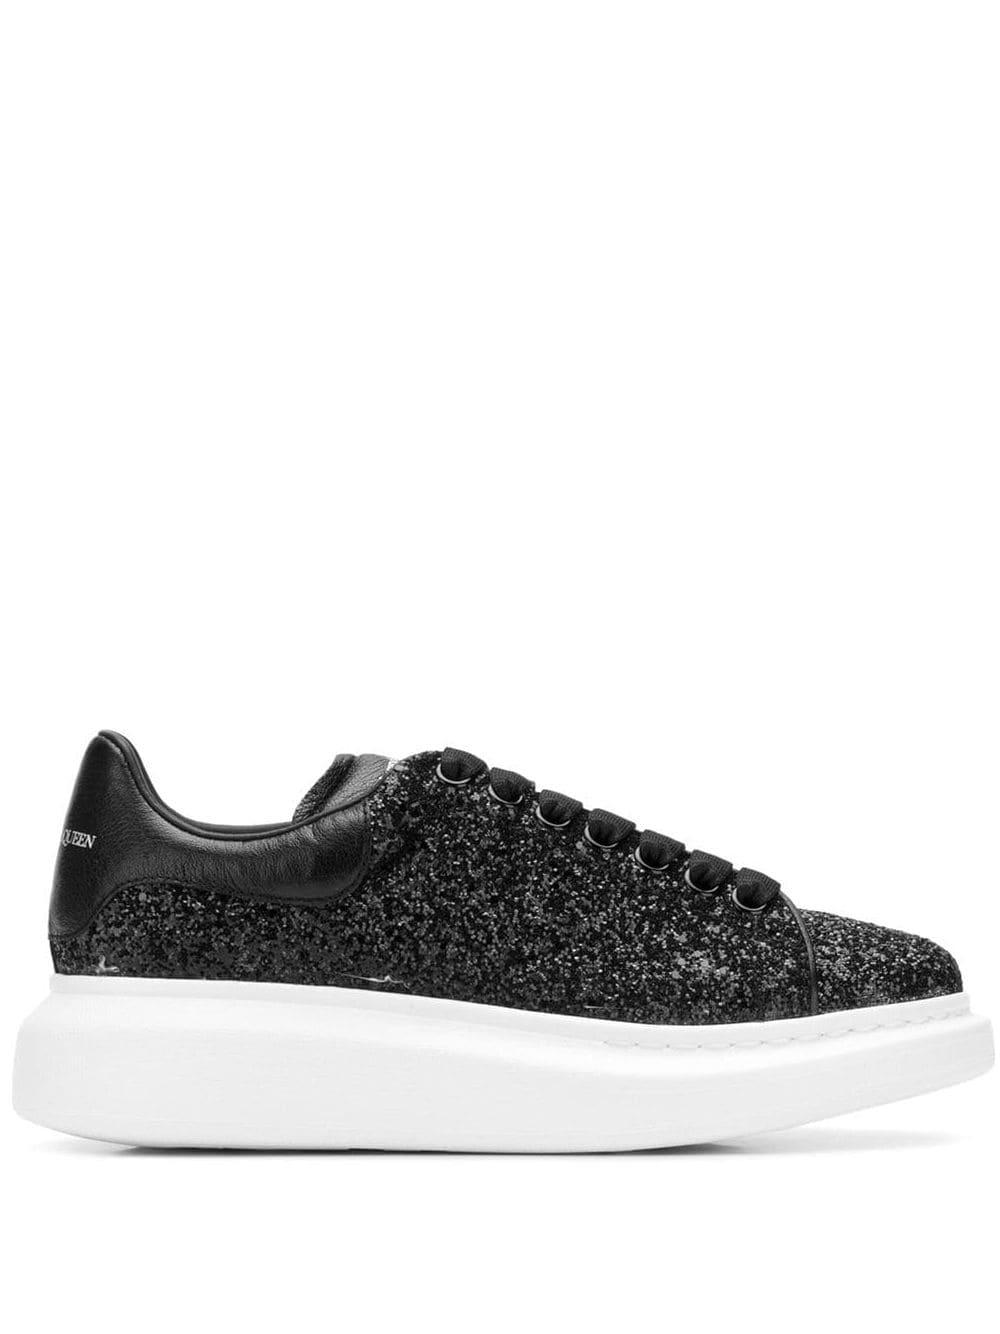 Alexander McQueen Leather Black Glitter Oversized Sneakers - Save 32% ...